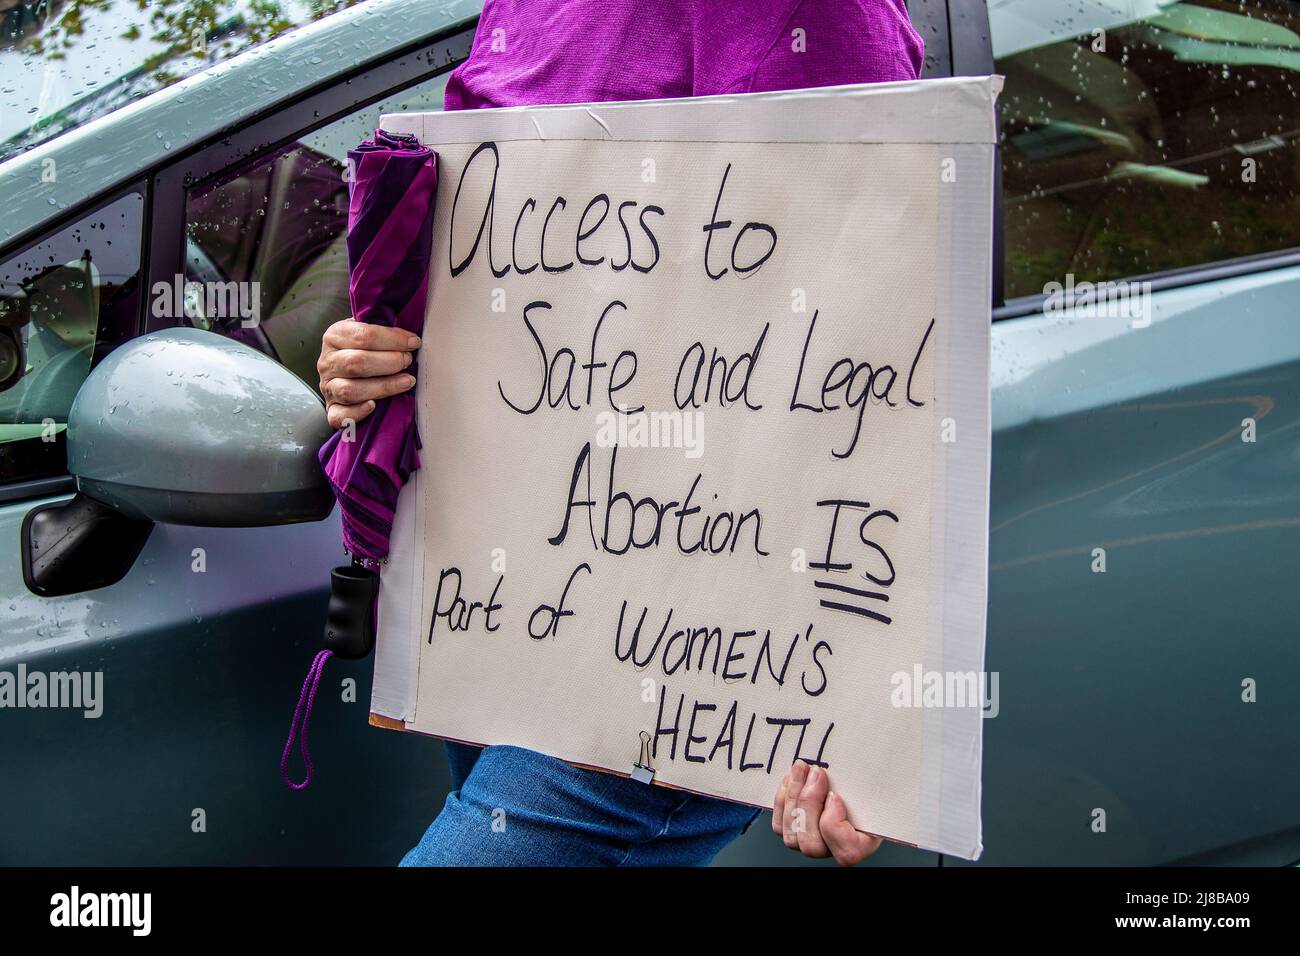 Home made sign reading Access to Safe and Legal Abortion Is part of womens health held by cropped woman in purple shirt holding umbrella standing by c Stock Photo